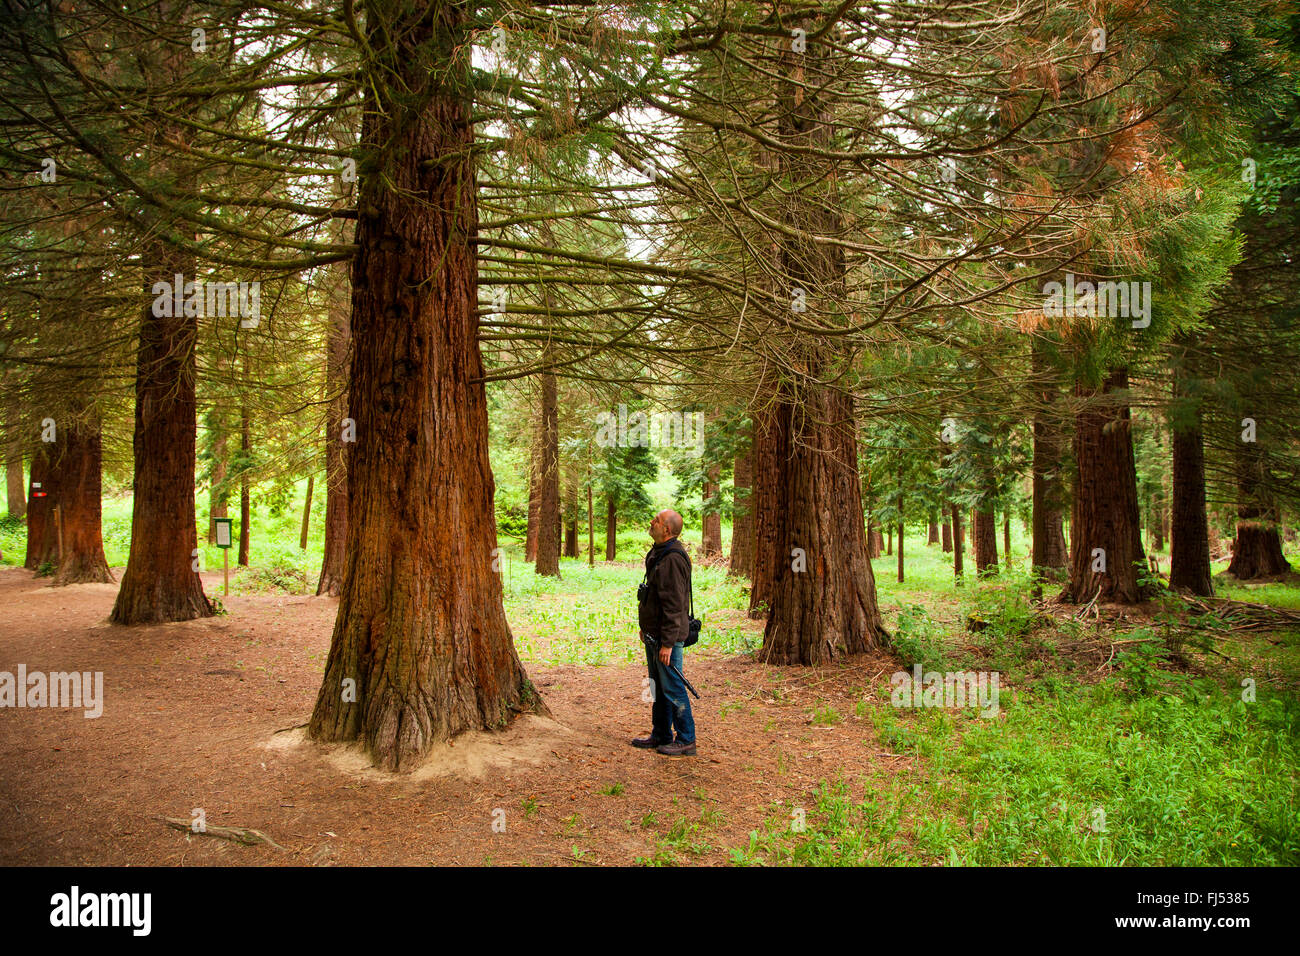 giant sequoia, giant redwood (Sequoiadendron giganteum), with a man as scale, Germany, Baden-Wuerttemberg, Kaiserstuhl Stock Photo